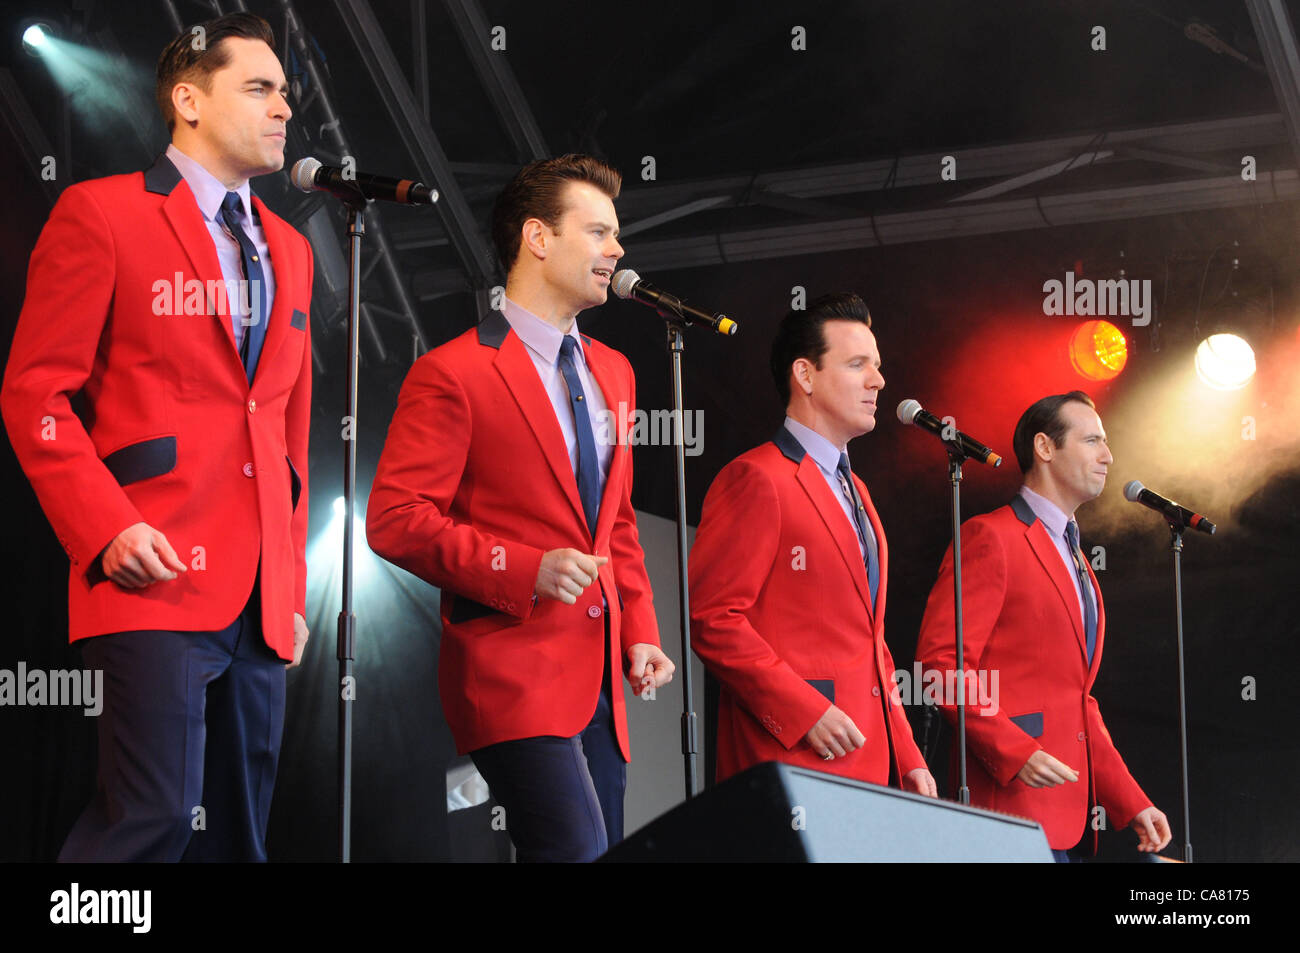 London - Cast of 'Jersey Boys' at West End Live at Trafalgar Square, London  - June 24th 2012 Photo by People Press Stock Photo - Alamy